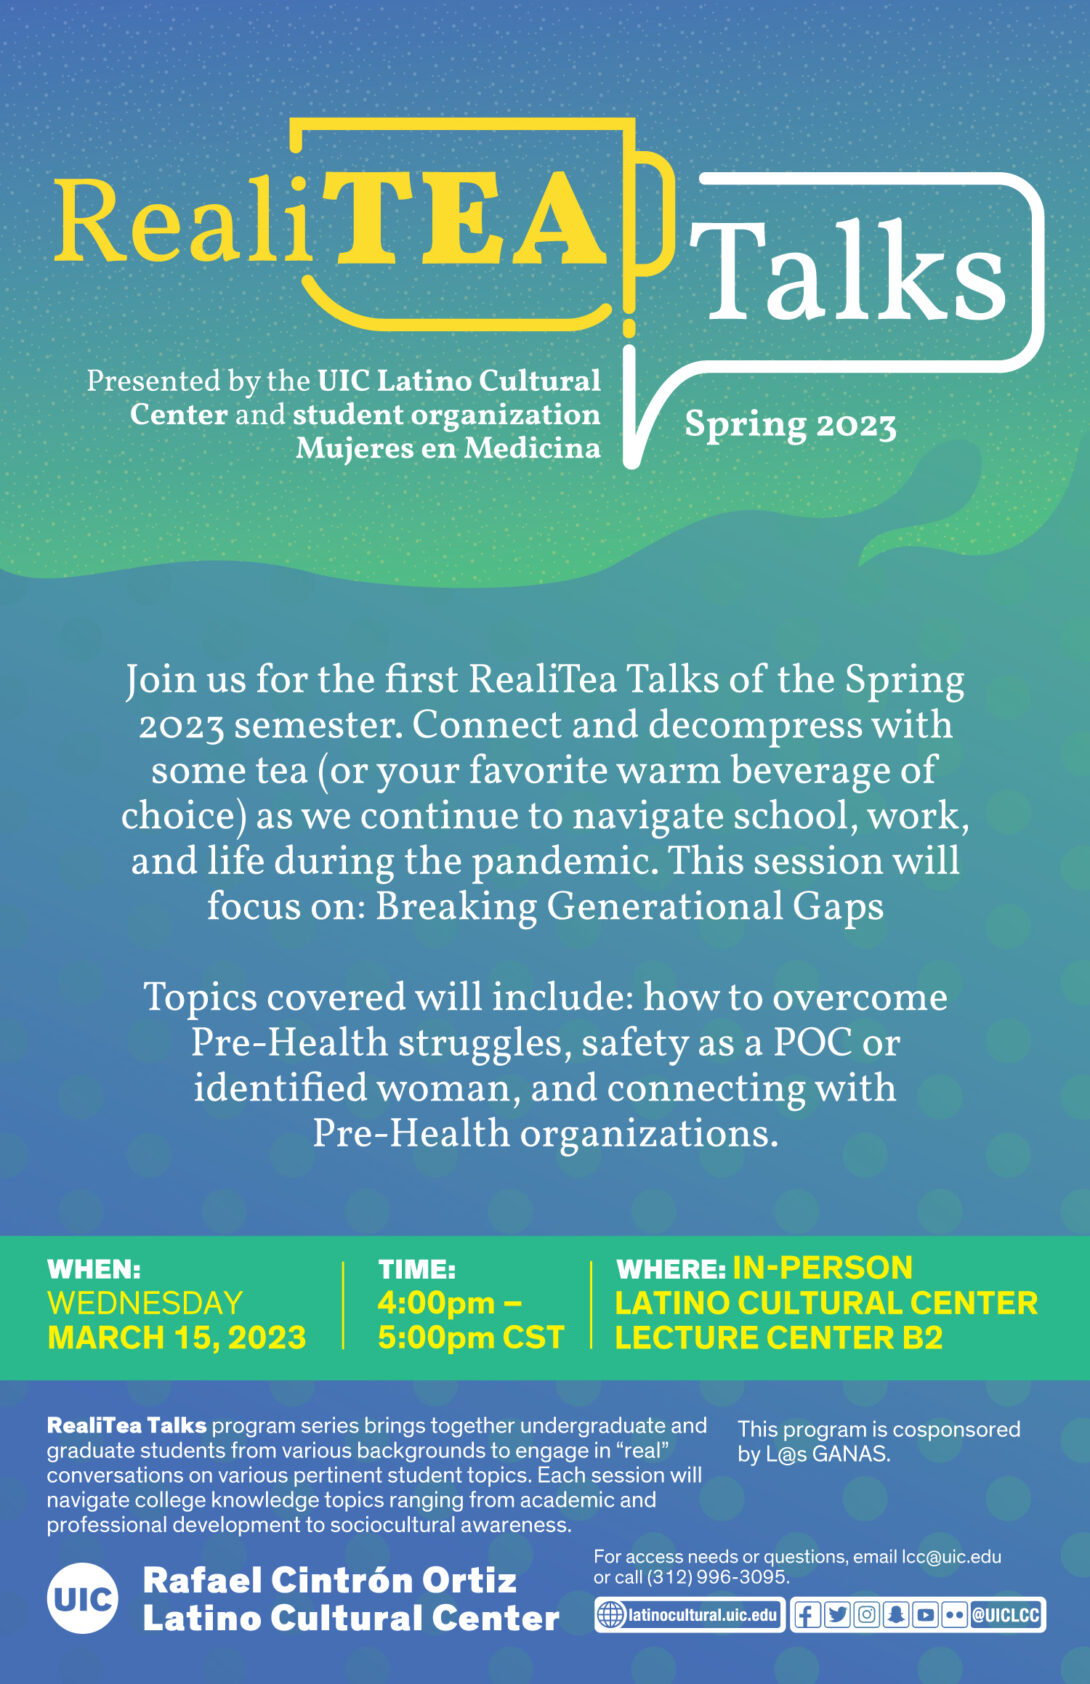 A blue and green ombre flyer for the RealiTEA Talks event. White text lists the description of the event, the hosts, details, and location. The UIC logo is shown in white at the bottom left corner next to the logo for the Rafael Cintron Ortiz Latino Cultural Center